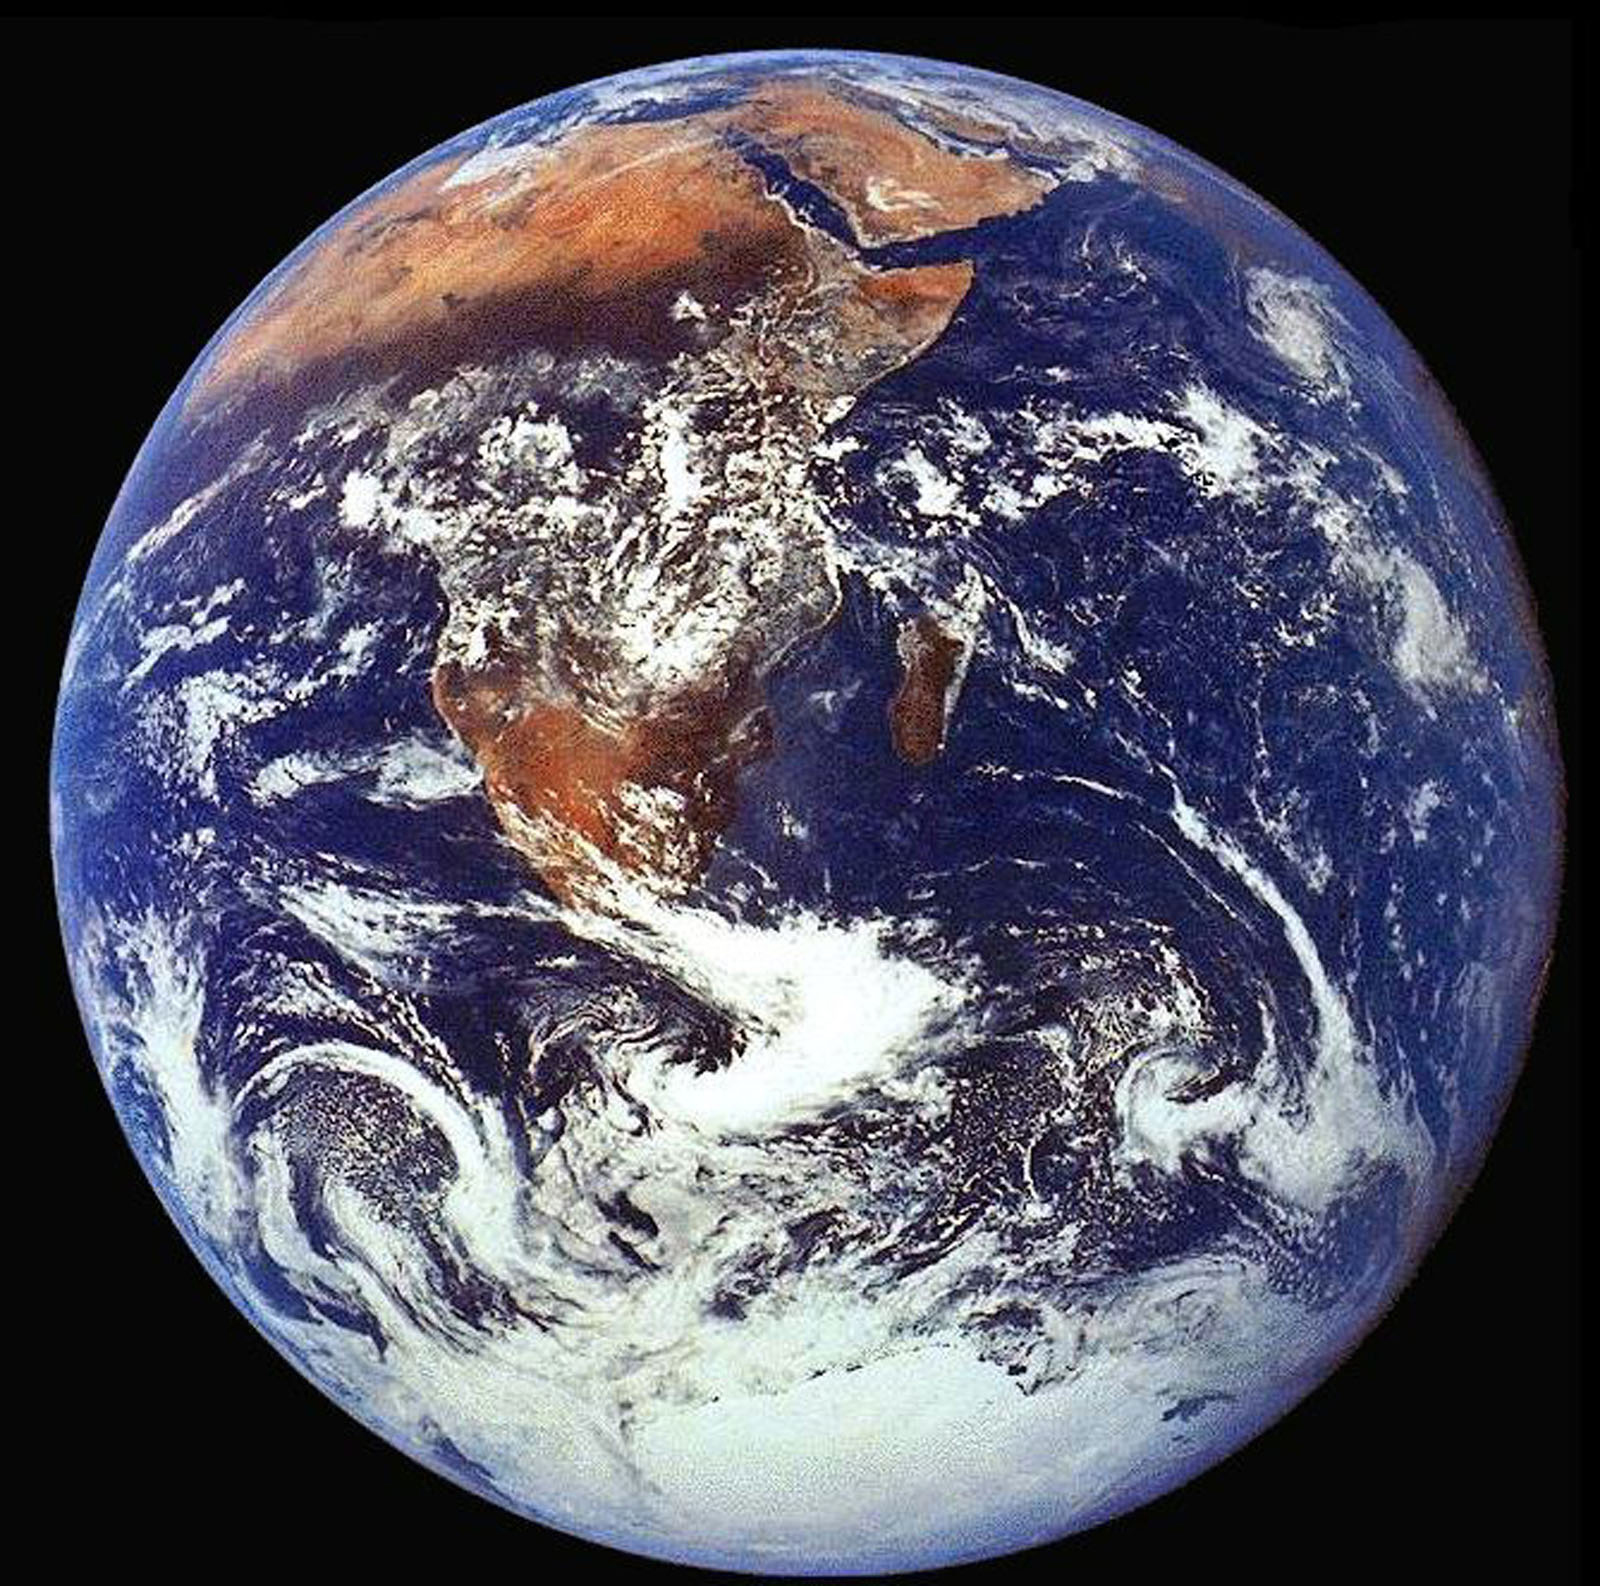 The Crew Of Apollo 17 Took This Photograph Of Earth In December 1972 While The Spacecraf